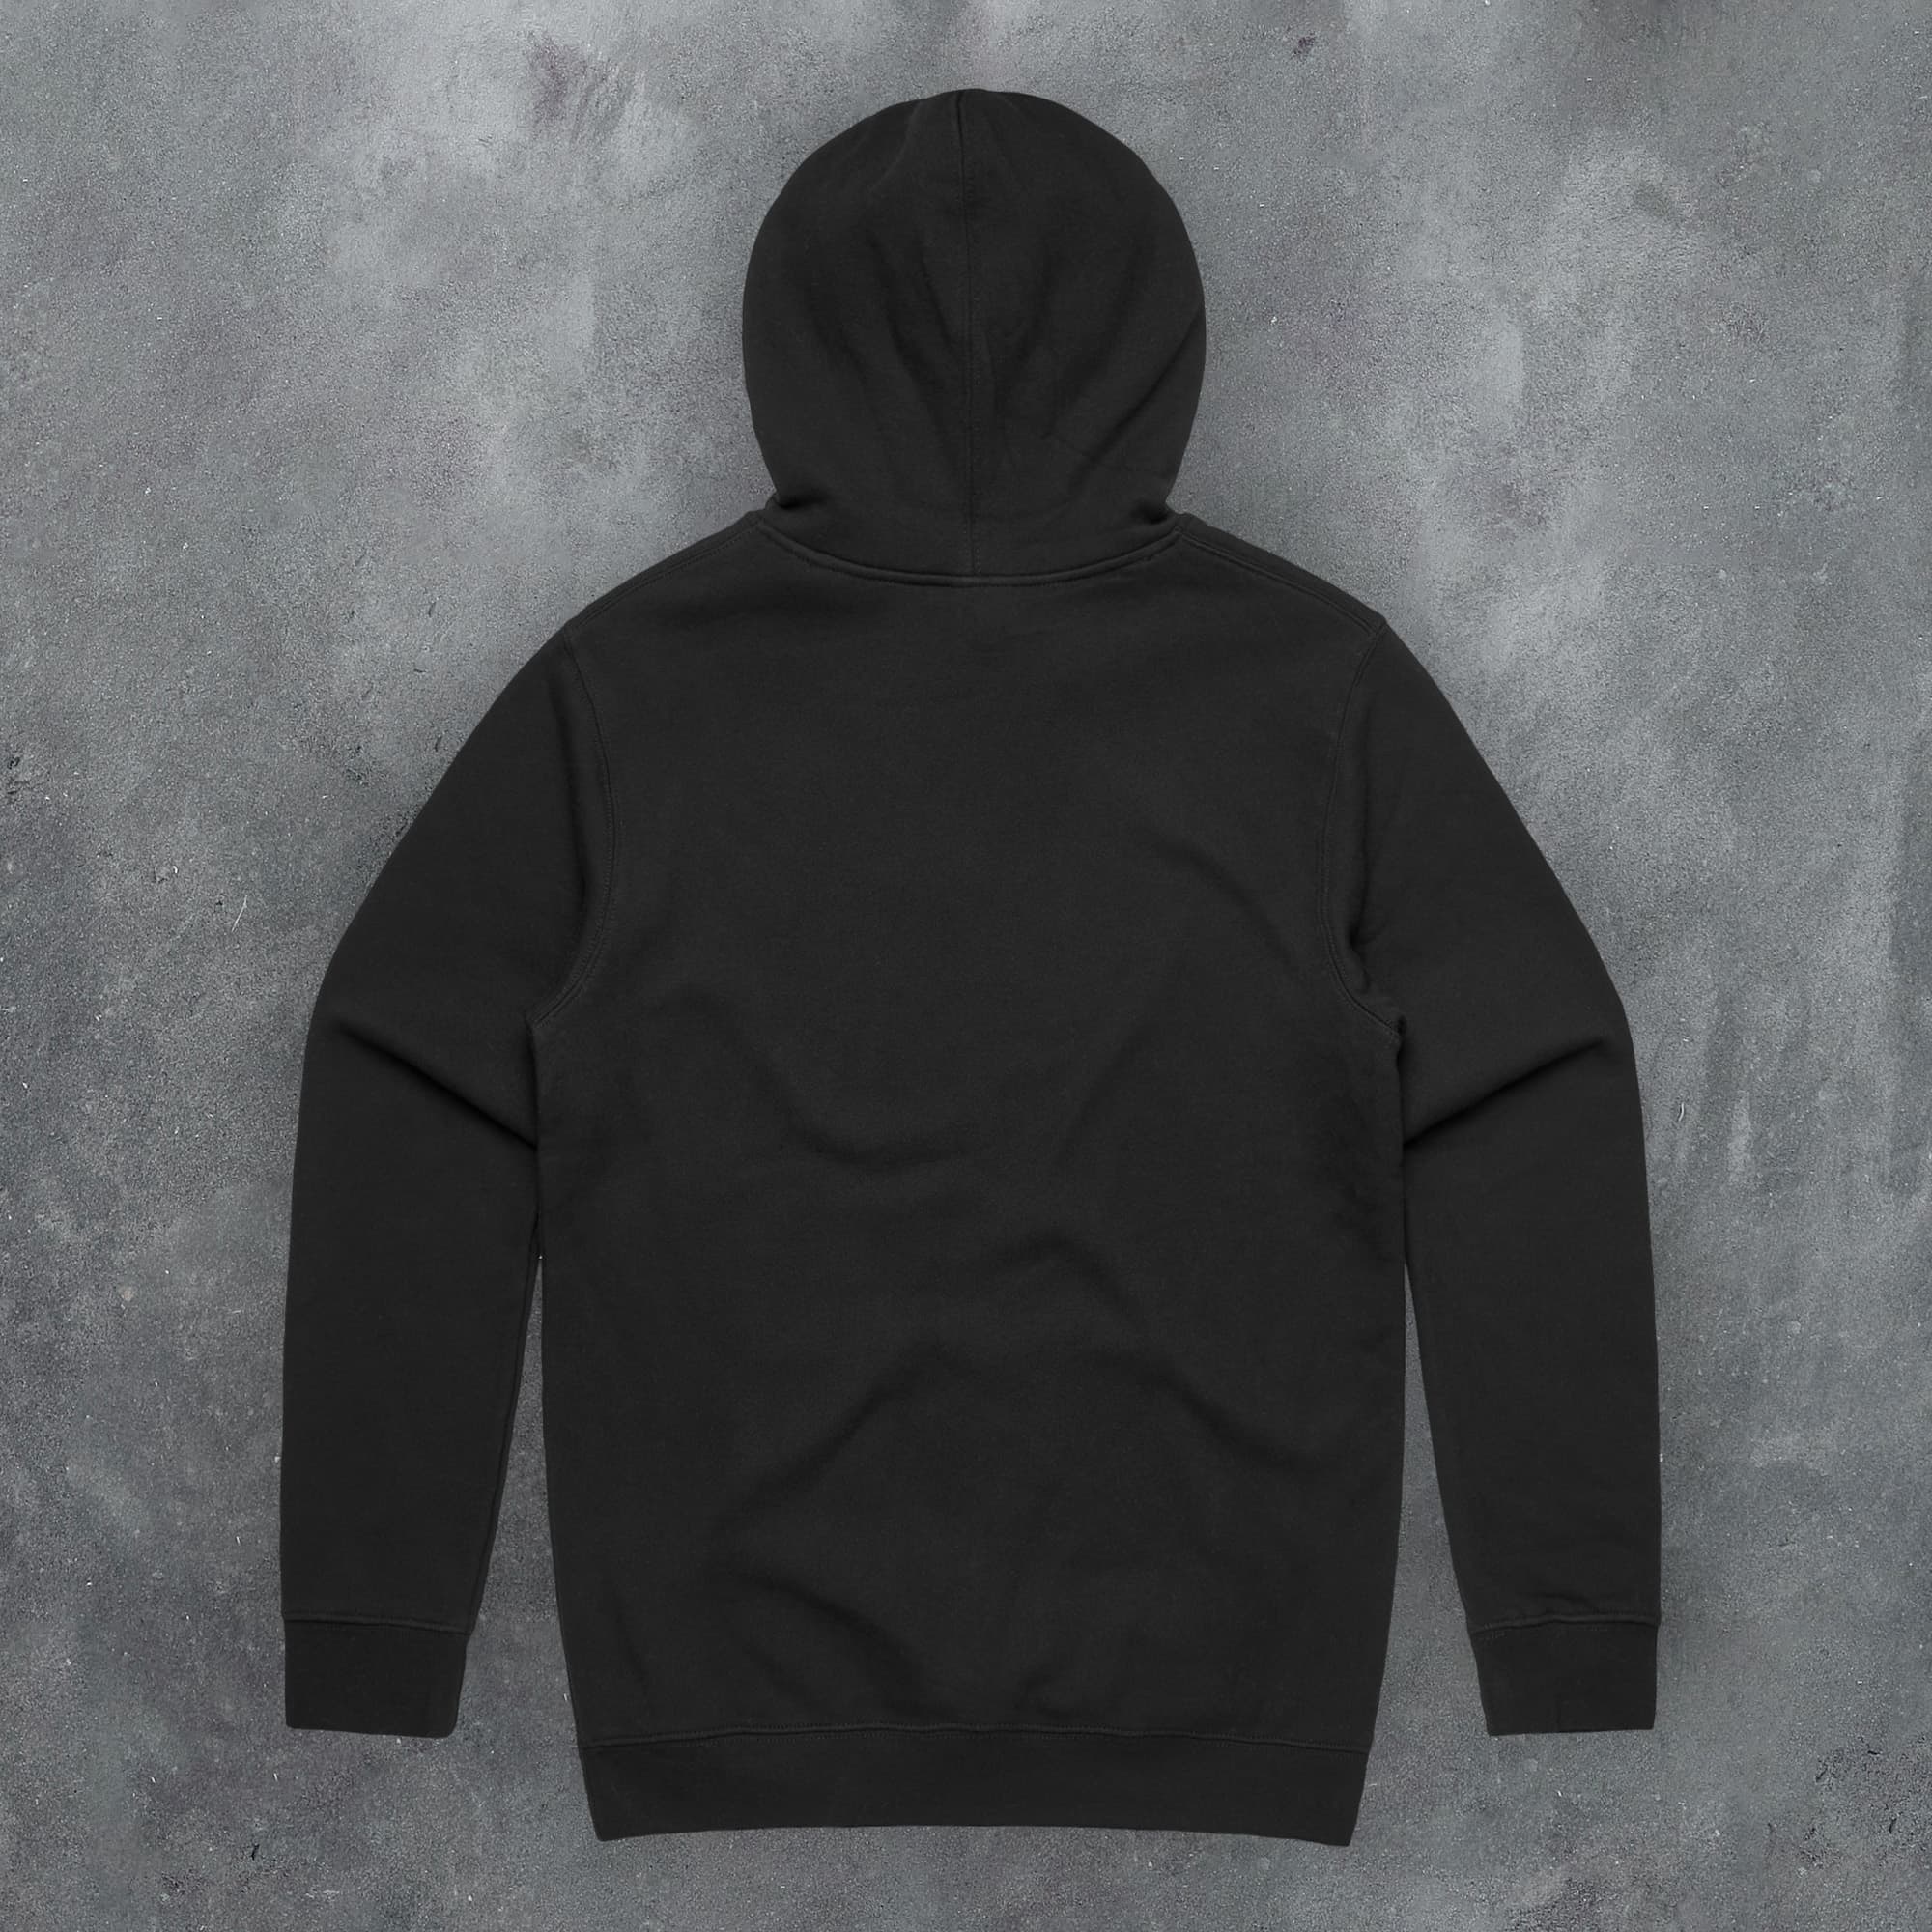 a black sweatshirt with a hoodie on it